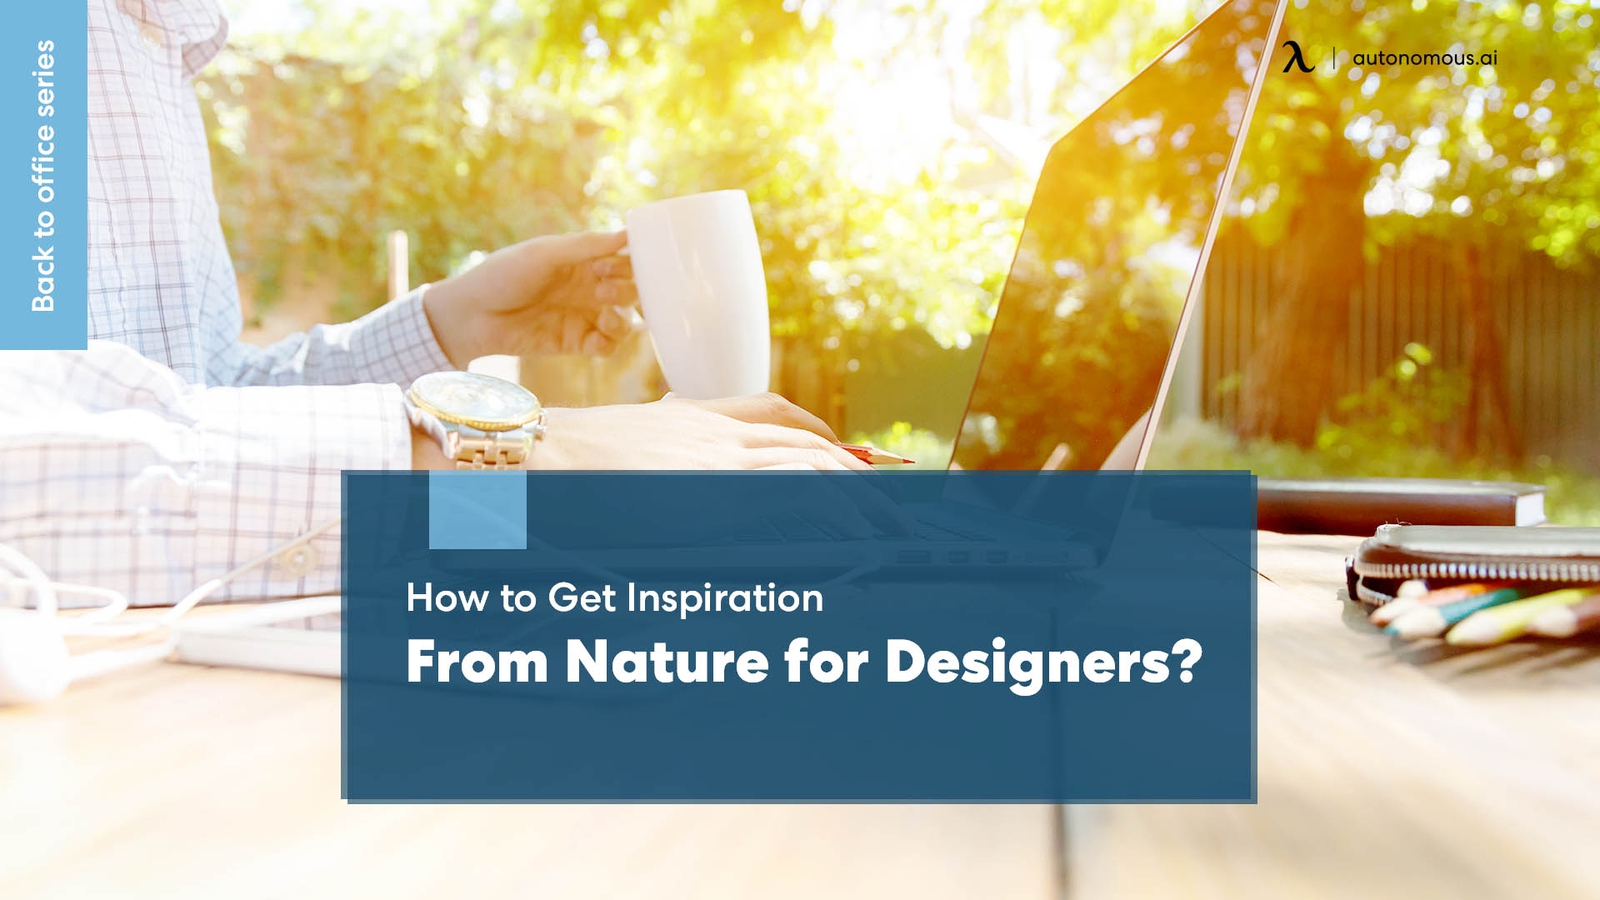 How to Get Inspiration from Nature for Designers?